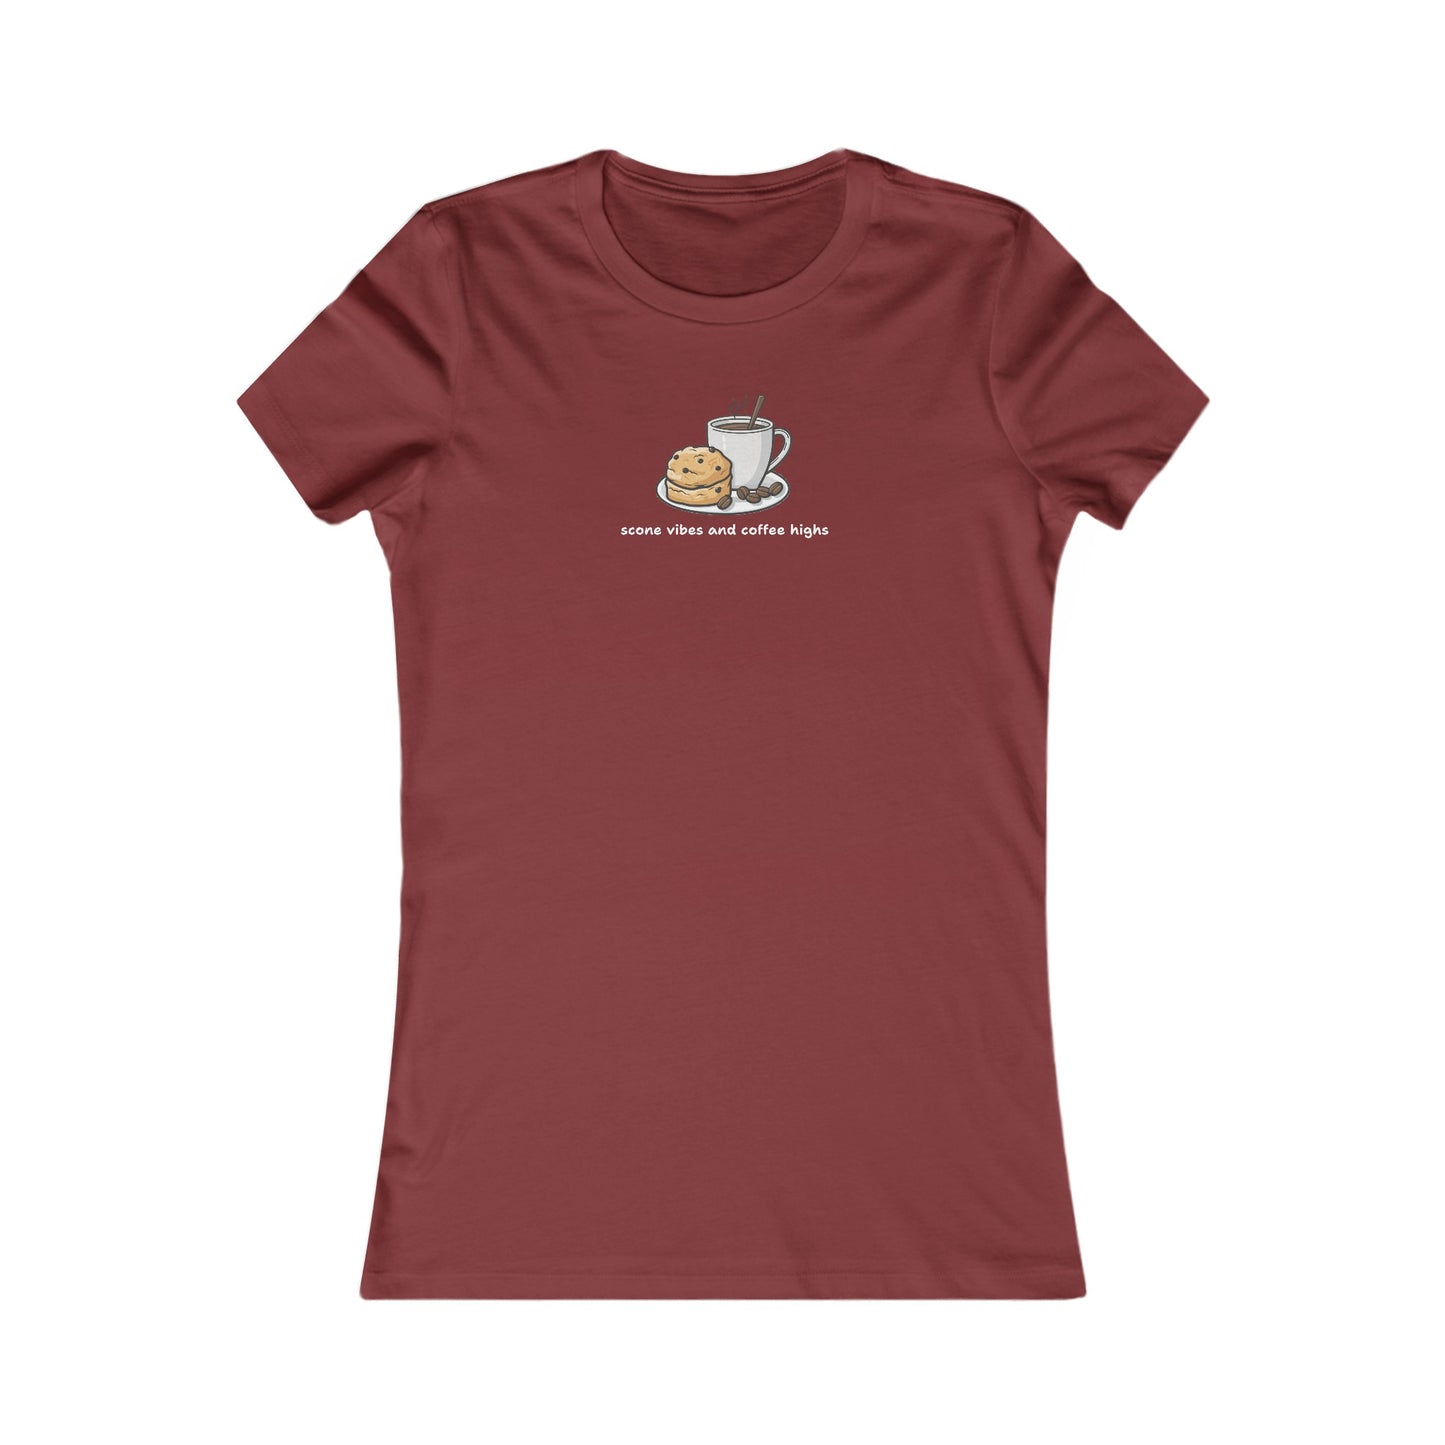 Scone Vibes and Coffee Highs Women's T-Shirt